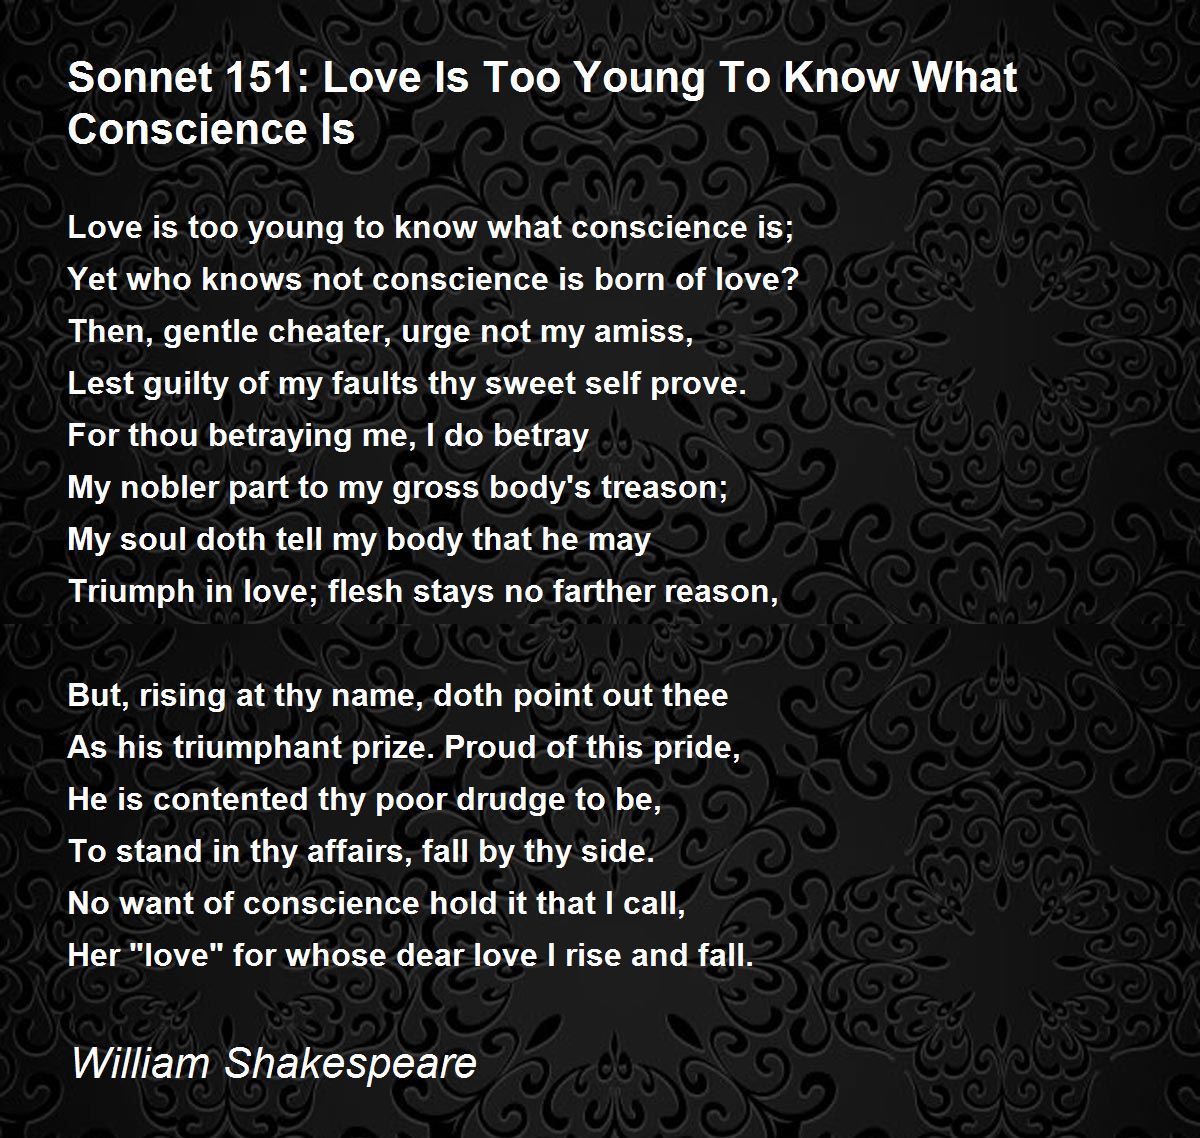 sweet simple quotes Love Sonnet Conscience Know 151: Too What To Young Is Is